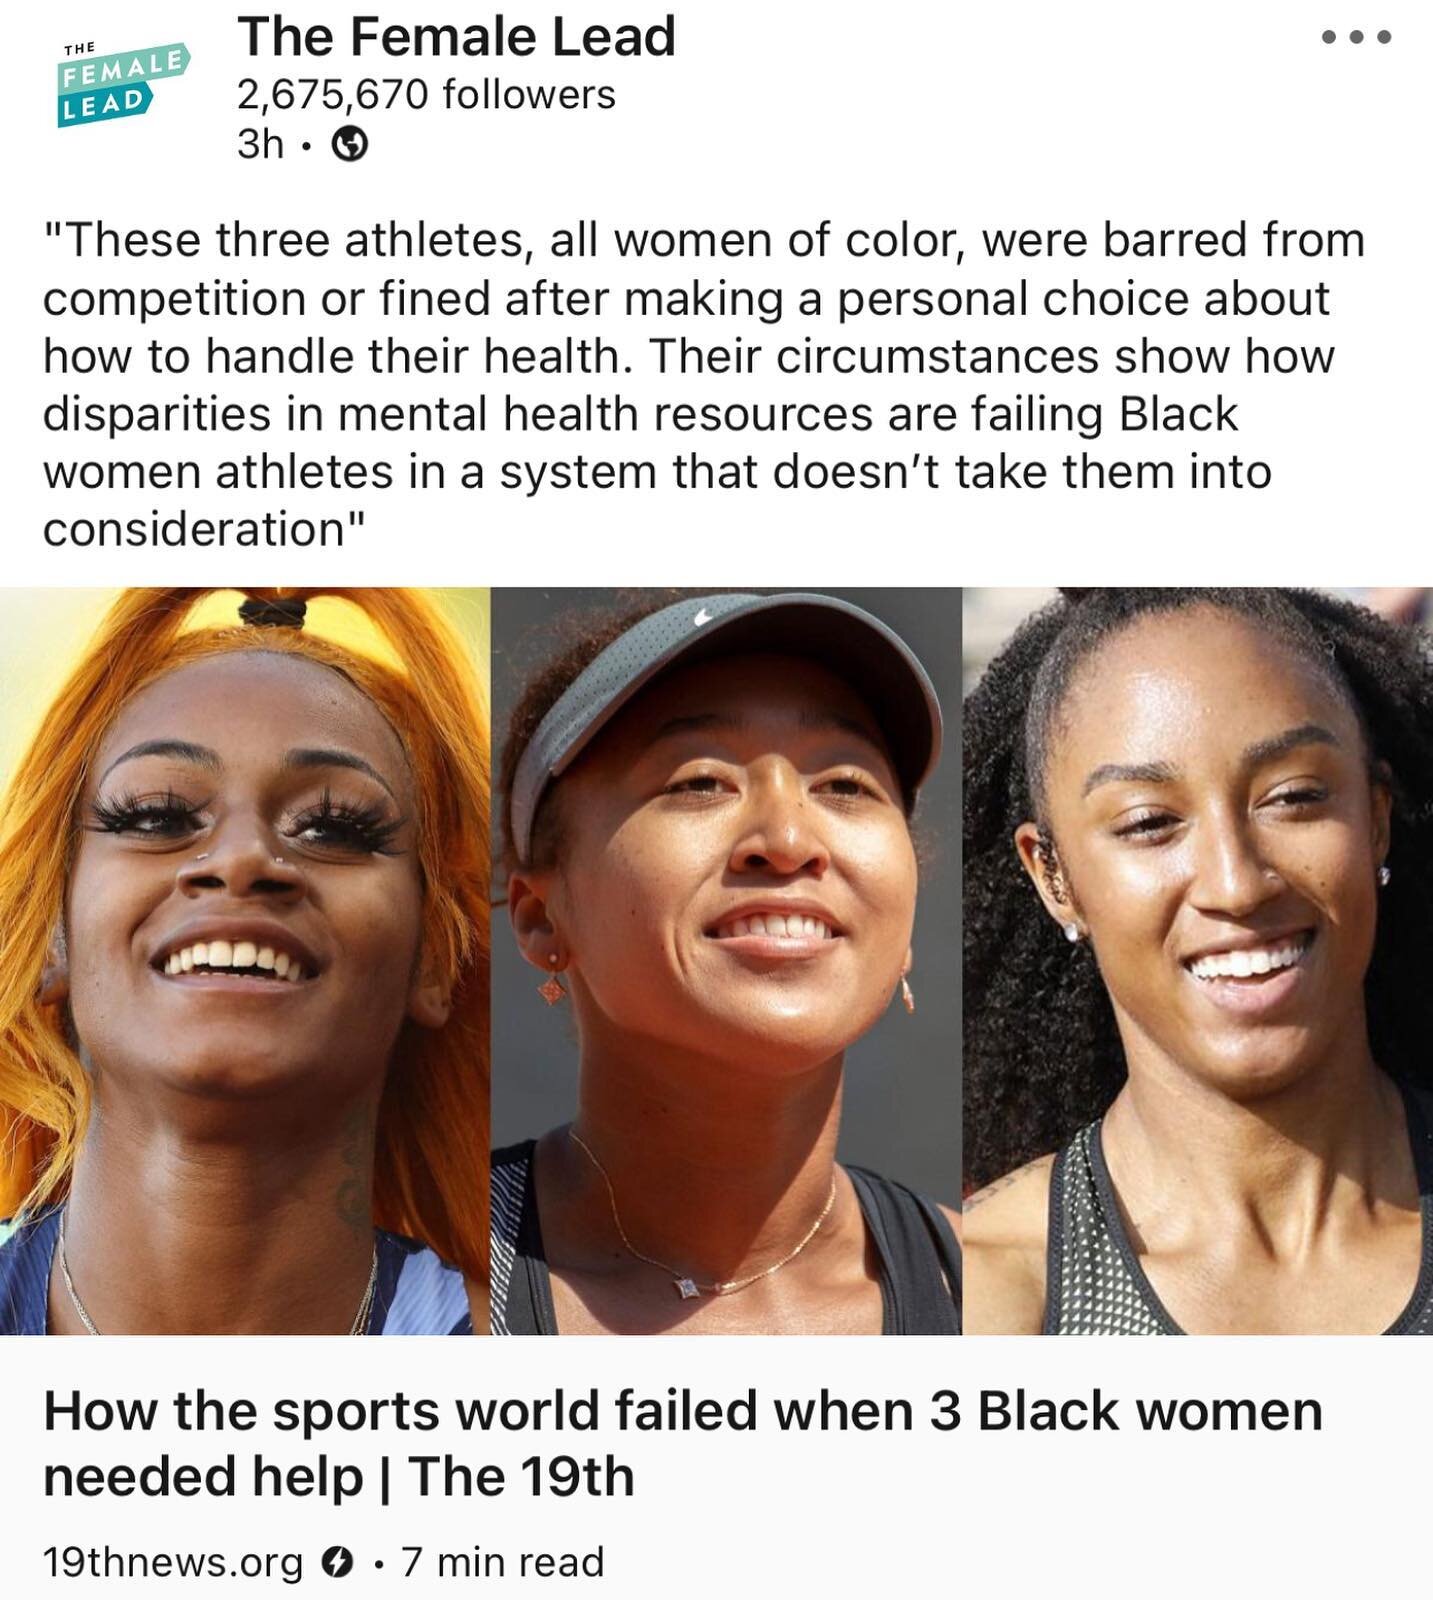 Compassion. It really is so simple, and yet so rare.

&ldquo;Sha&rsquo;Carri Richardson (@carririchardson_), a star sprinter, smoked marijuana as she processed news of her biological mother&rsquo;s death. 

Brianna McNeal (@brirollin), a 2016 Olympic